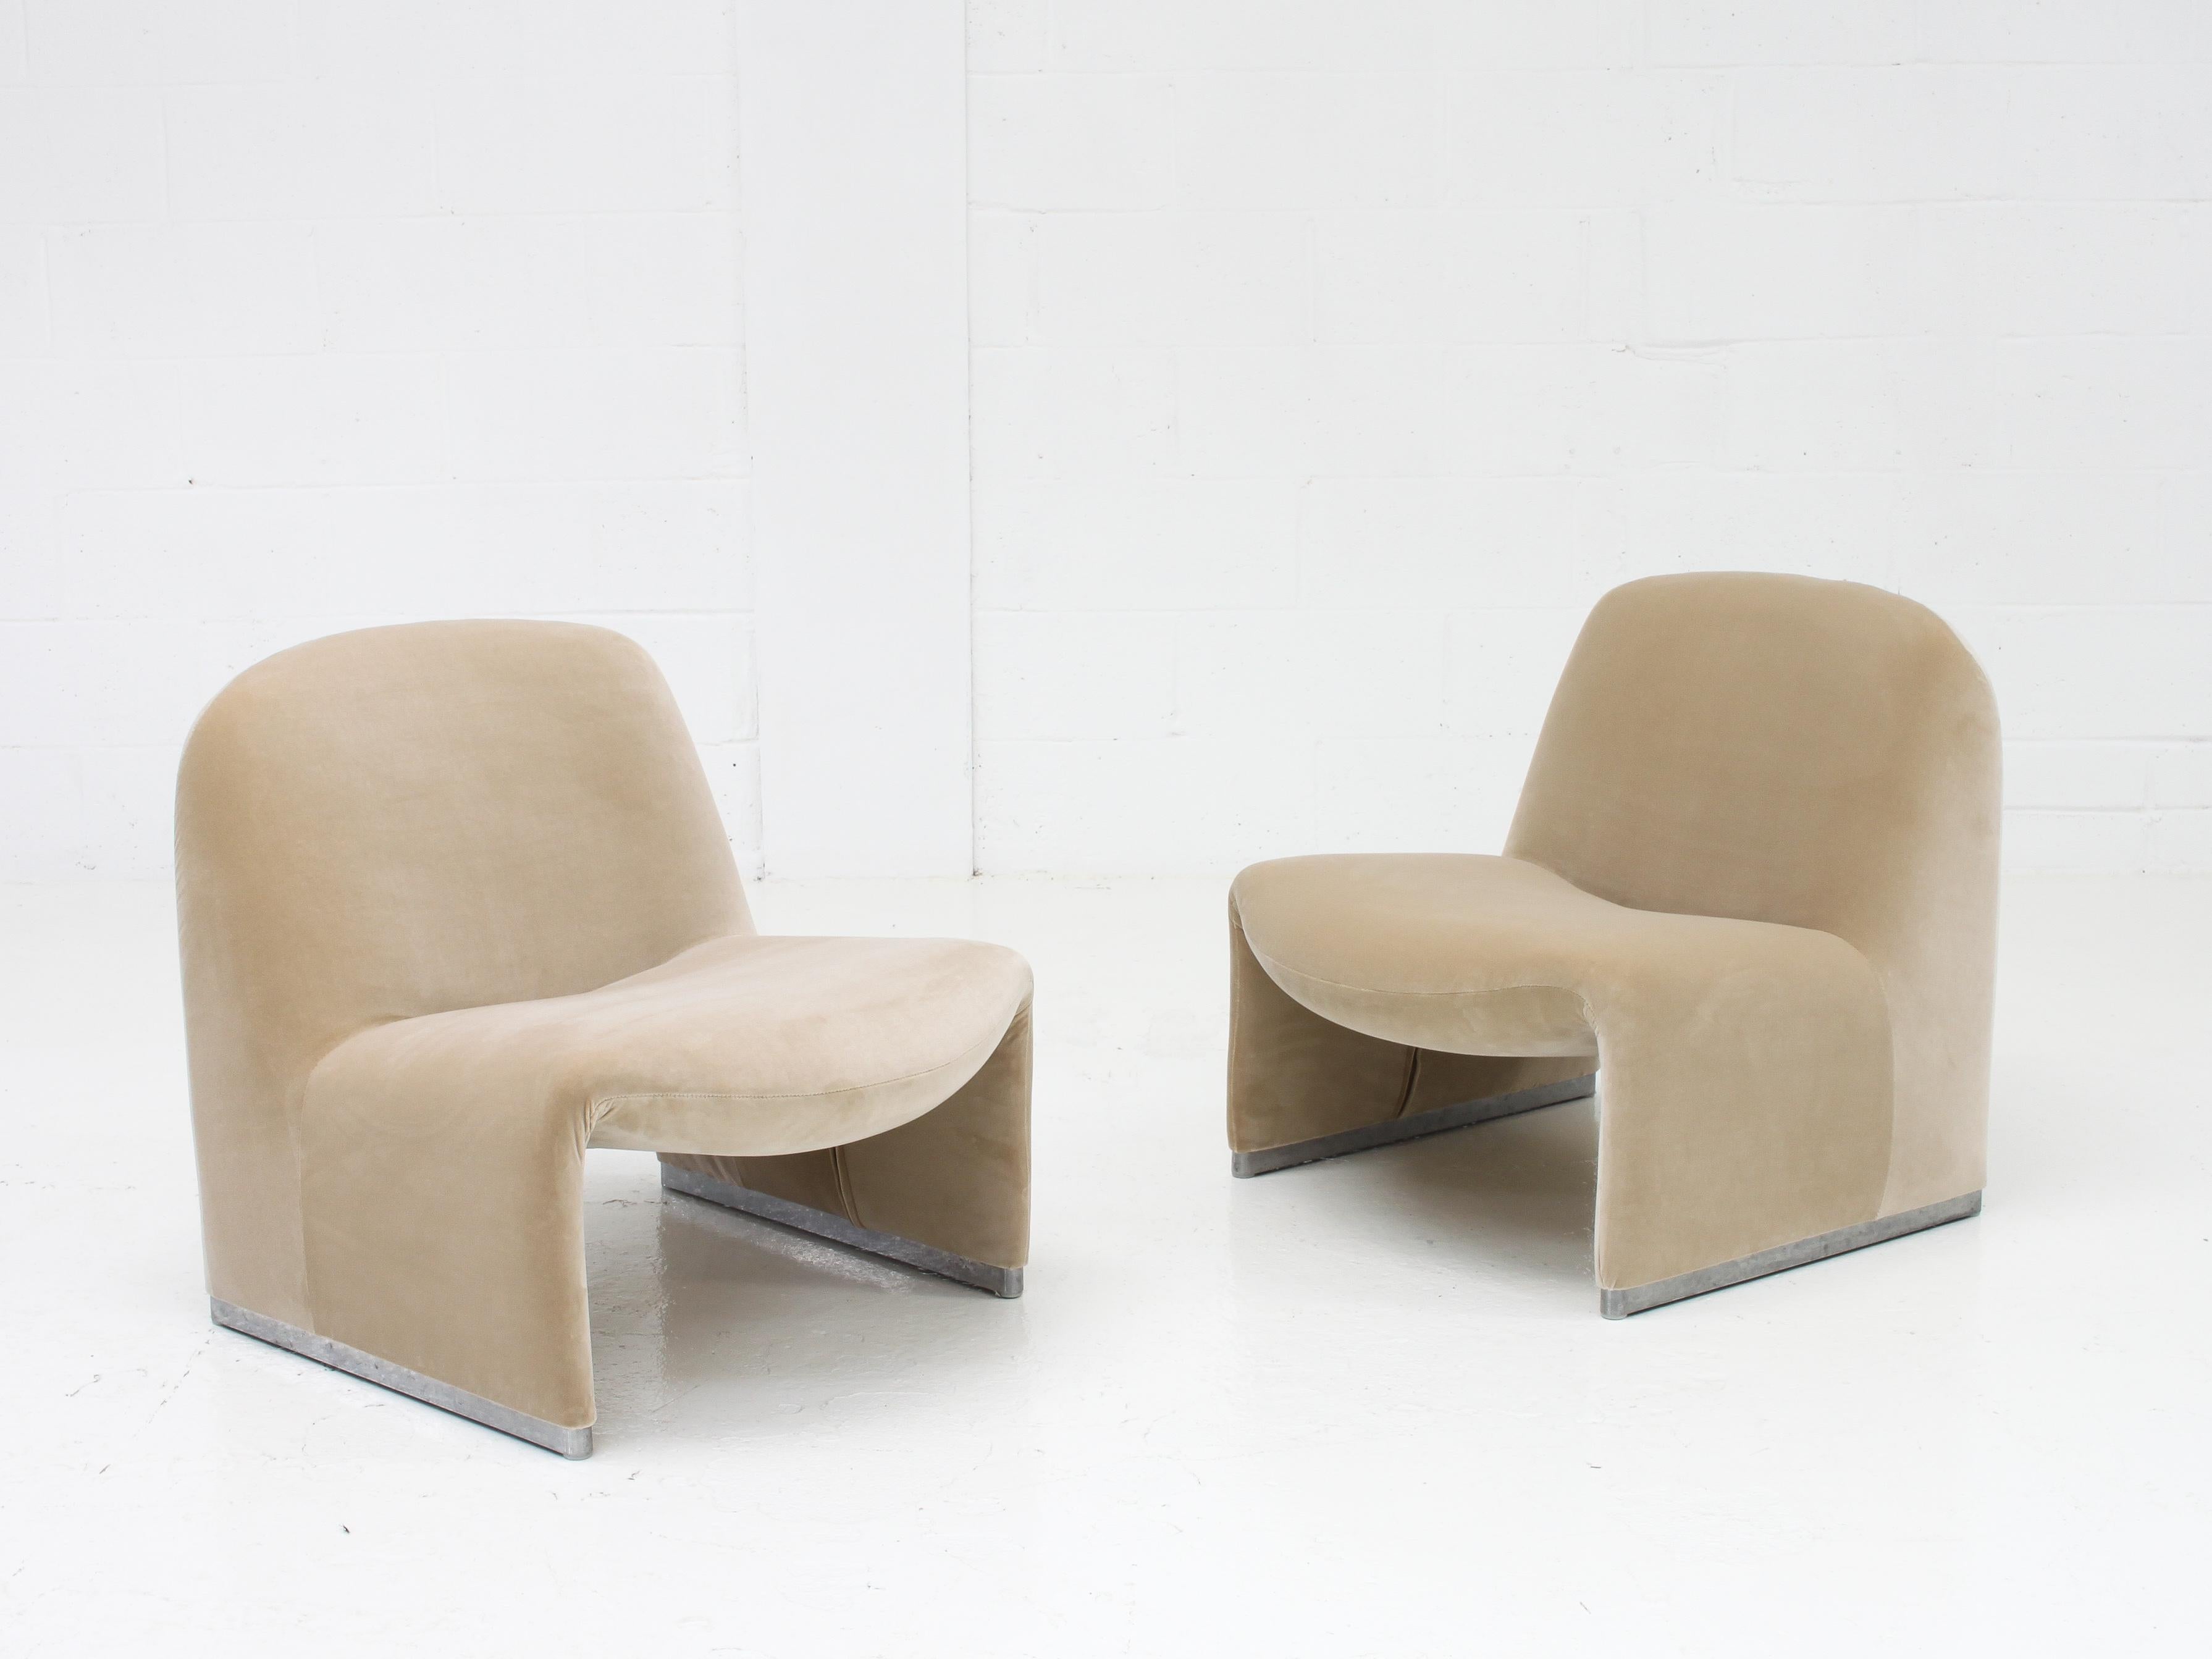 A pair of Giancarlo Piretti “Alky” chairs newly upholstered in Designers Guild linen colored cotton velvet. 

Manufactured by Artifort in the 1970s.

The organic shape offers a minimal appearance but also comfort.

Foam restored where required